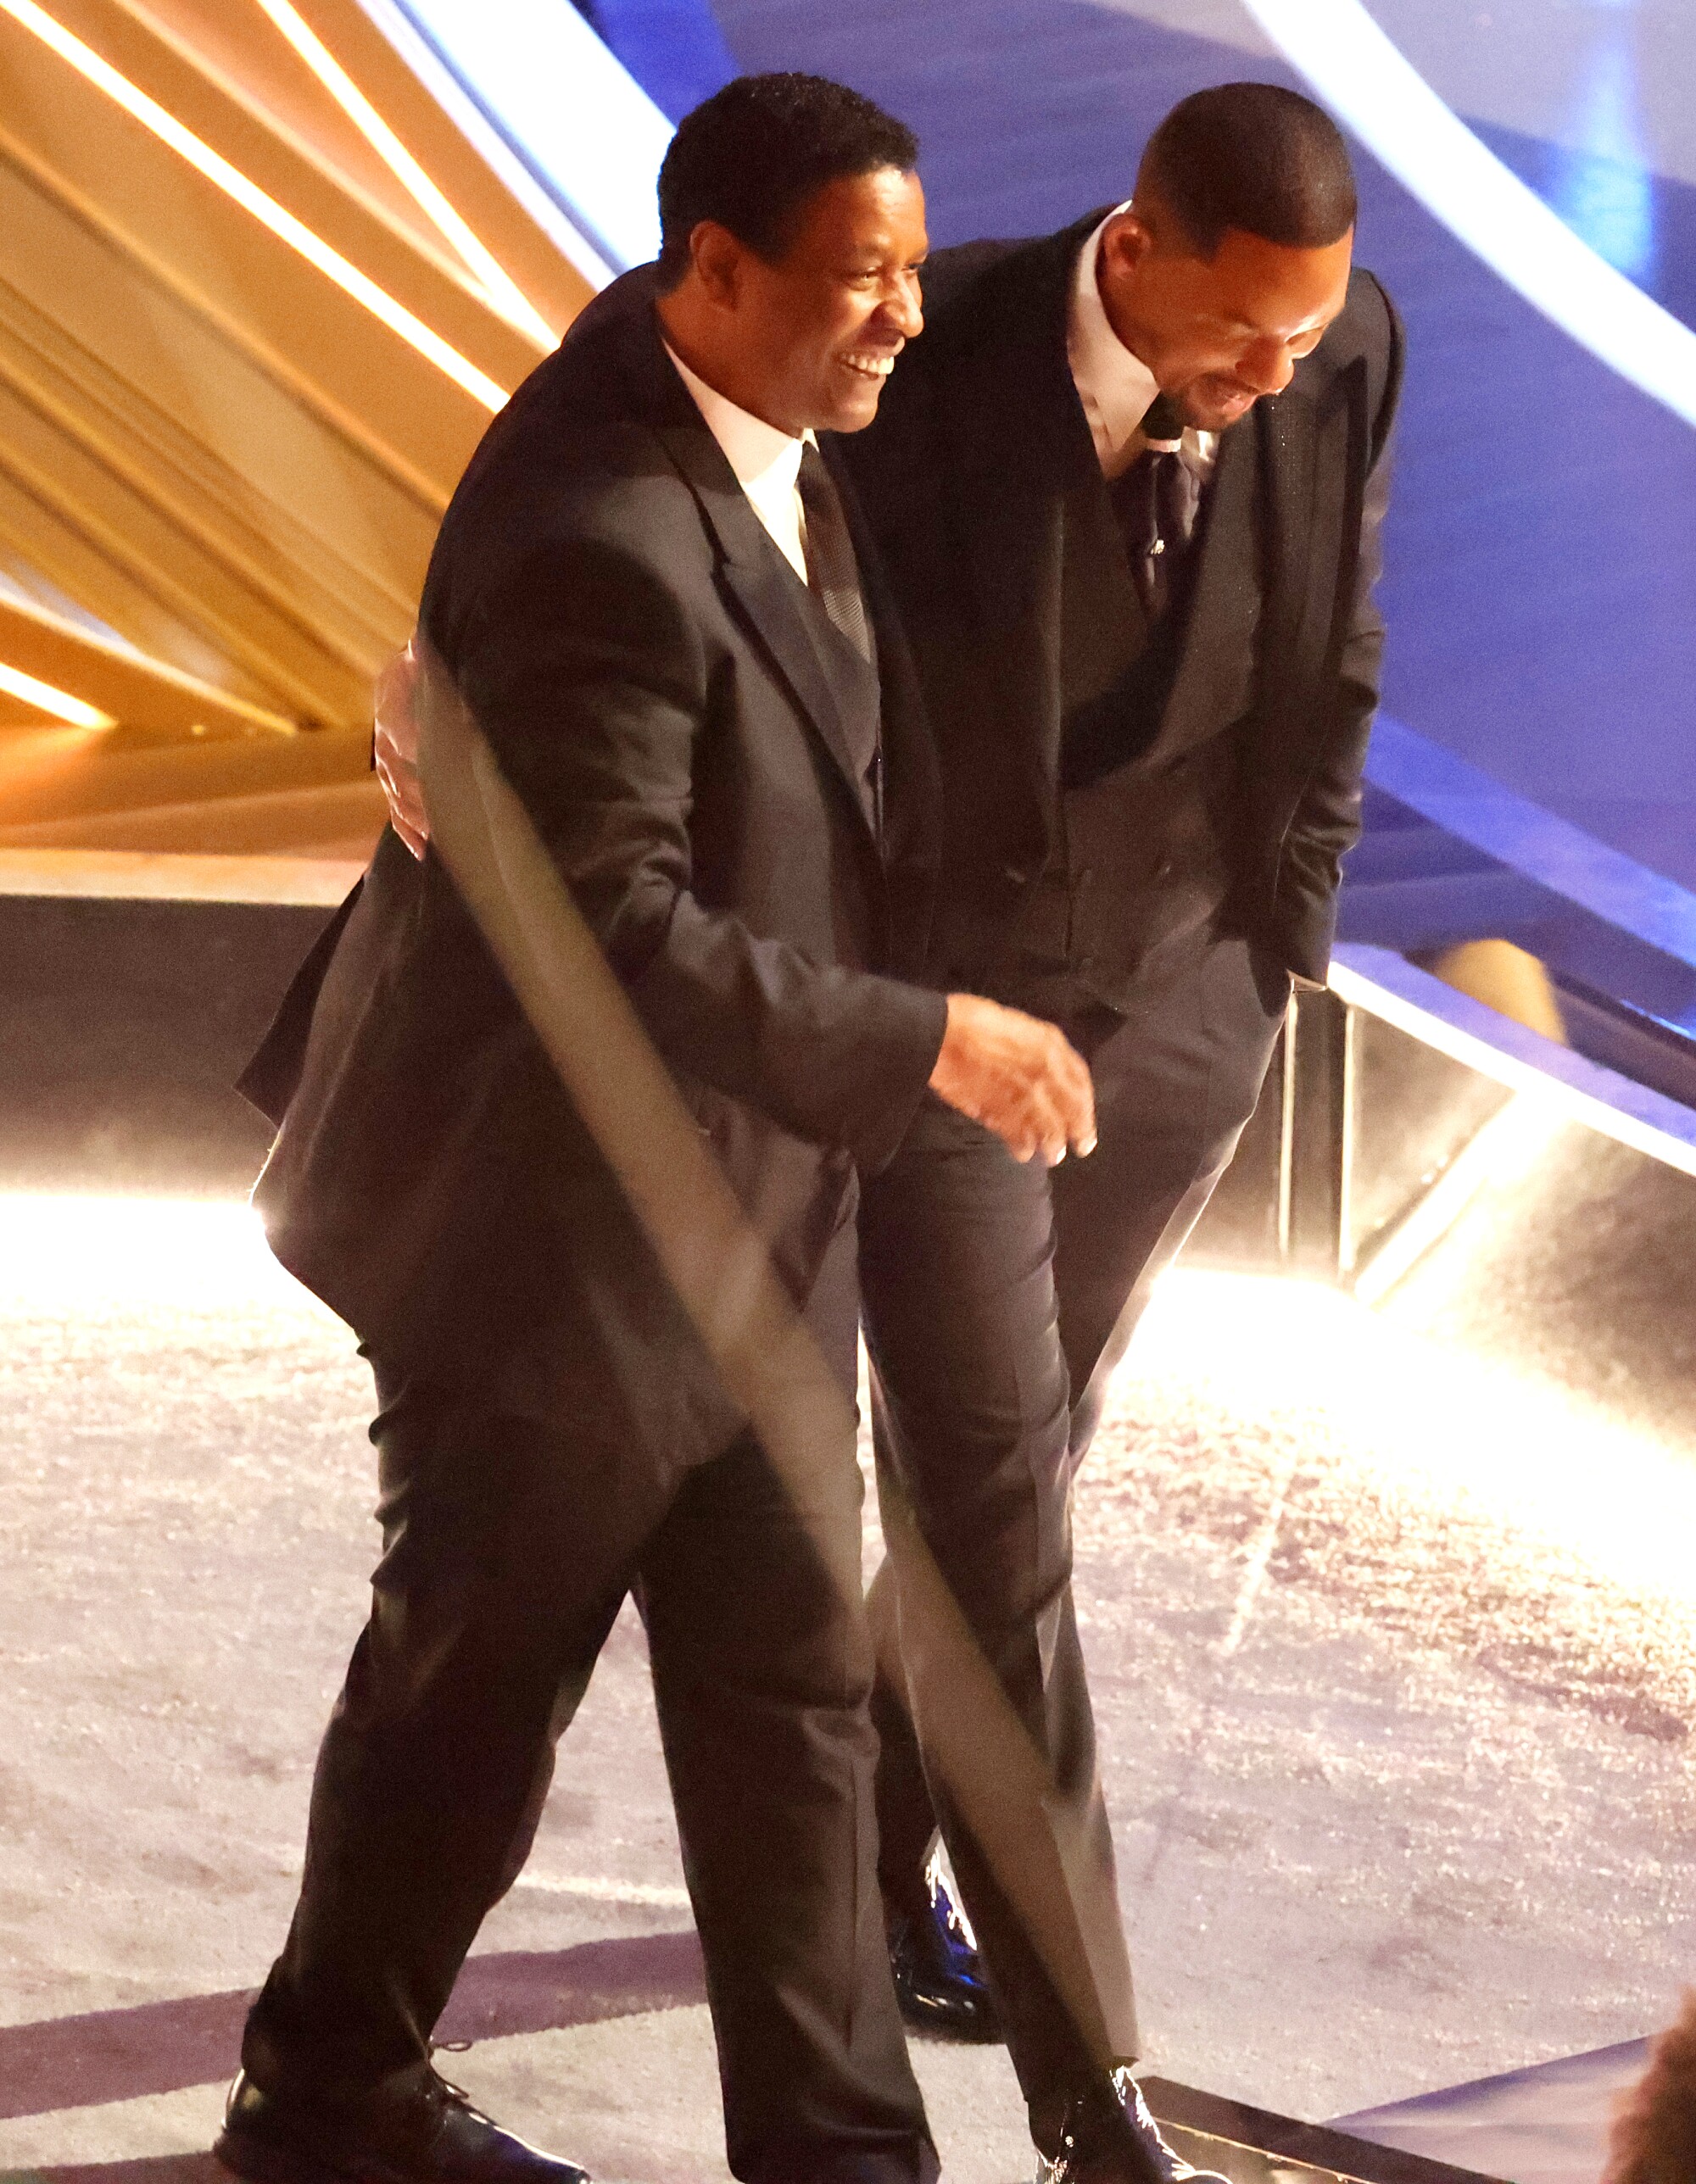 Denzel Washington comforts Will Smith during the 94th Academy Awards at the Dolby Theatre.